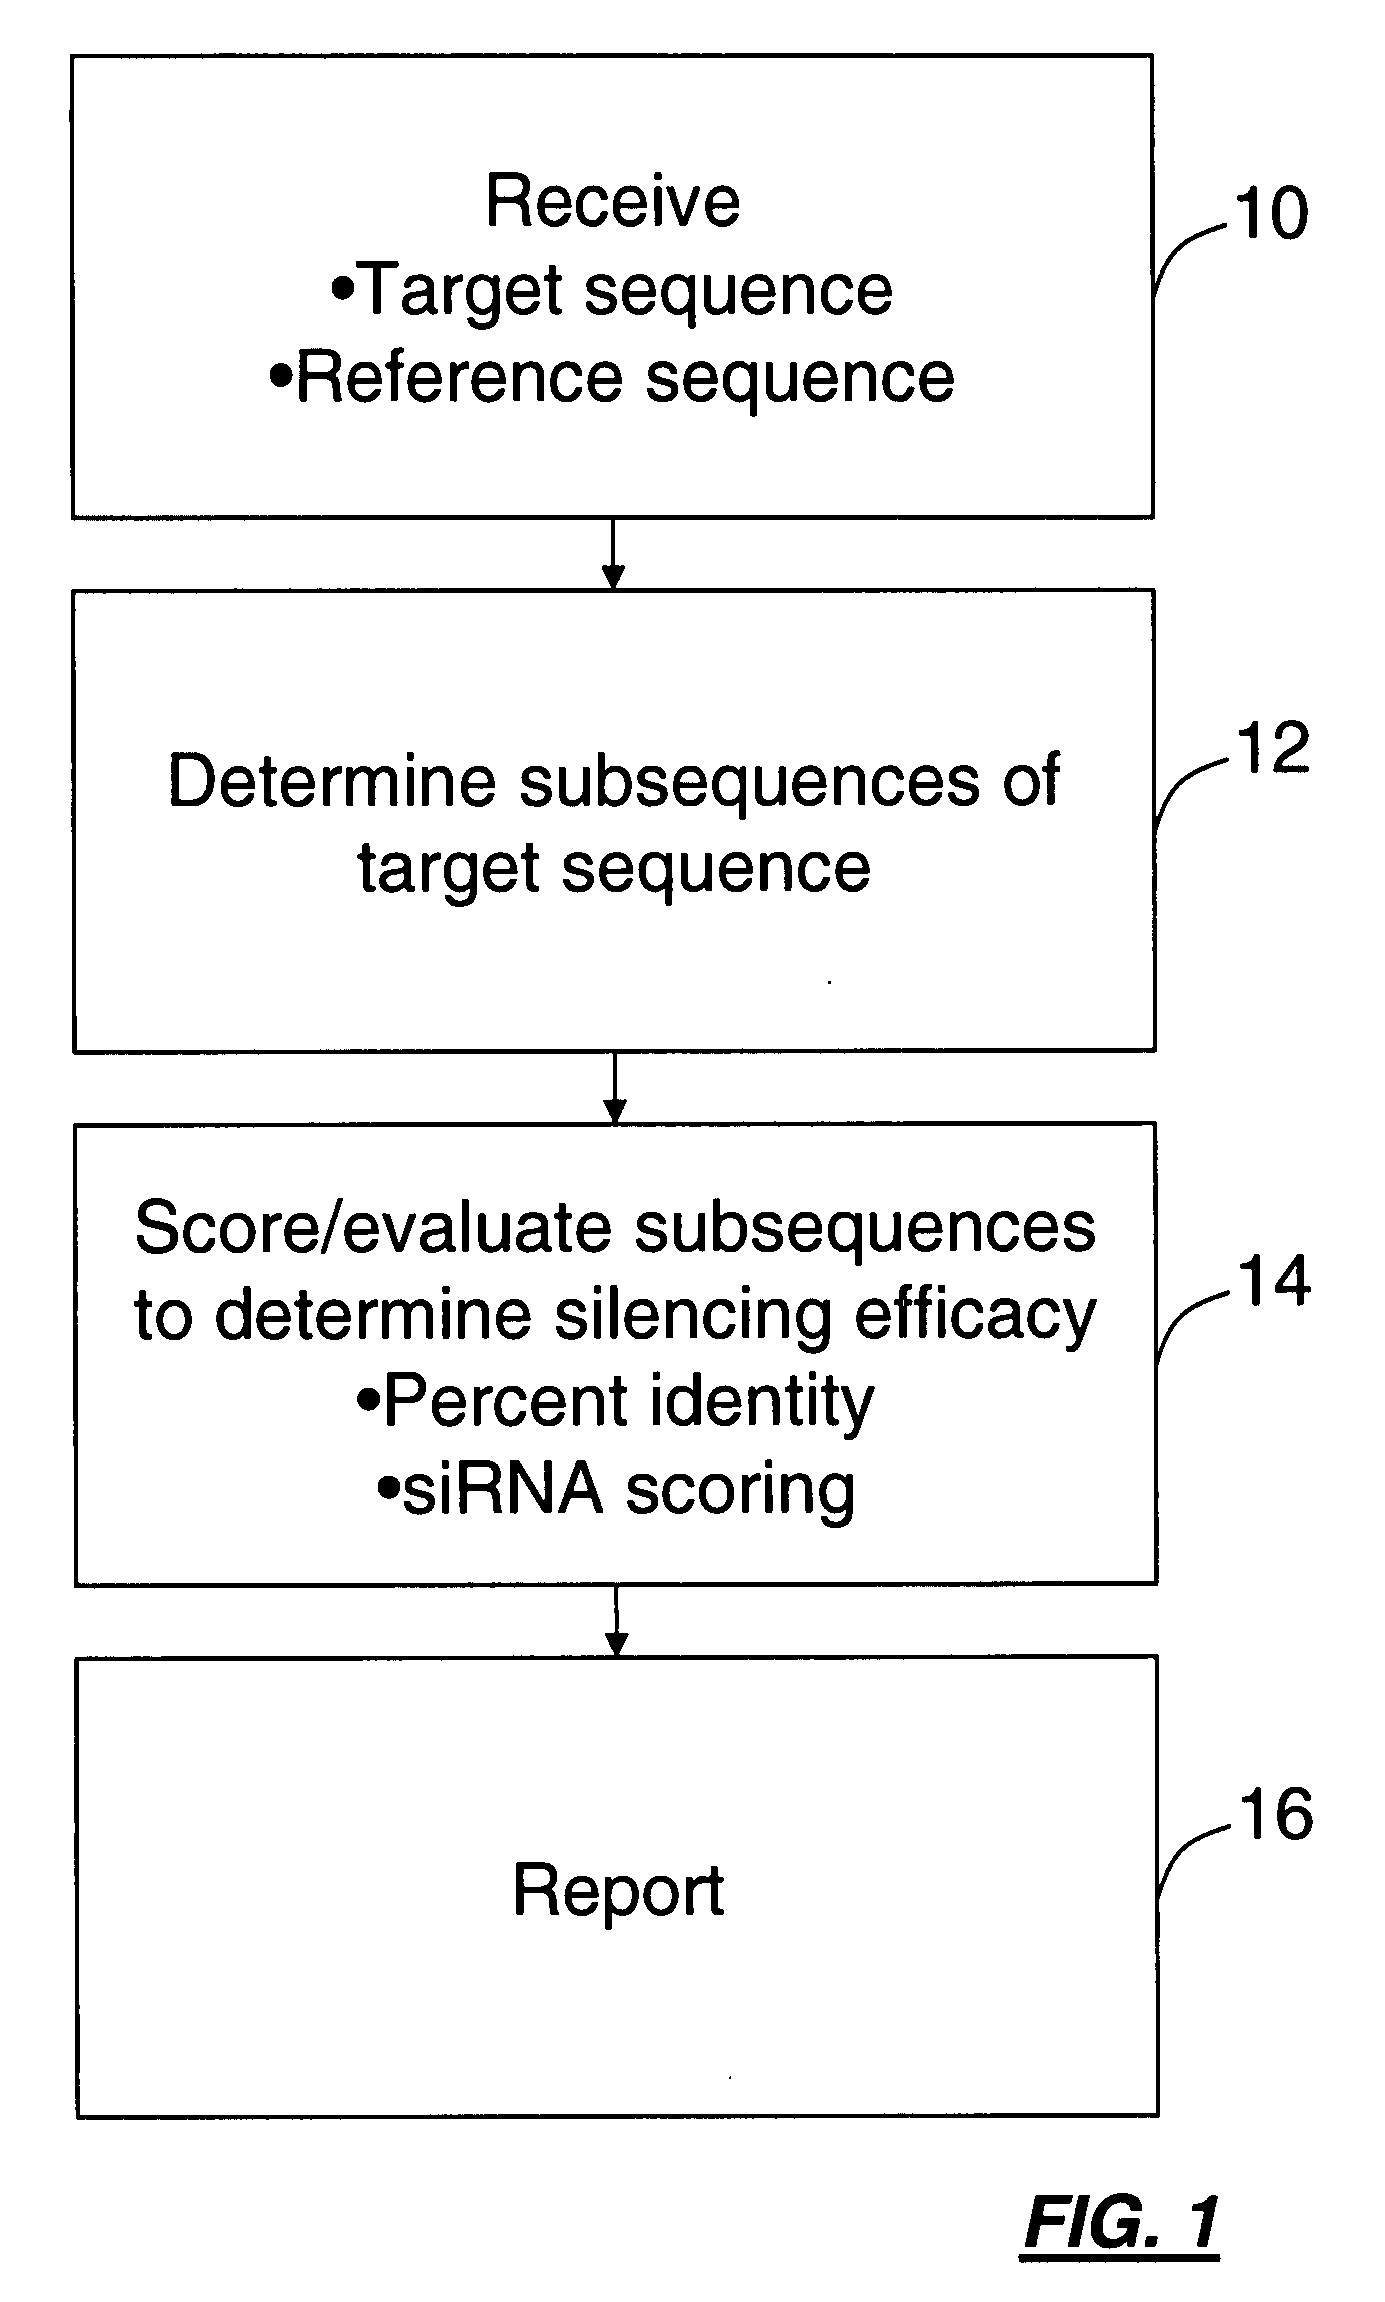 Computational method for choosing nucleotide sequences to specifically silence genes